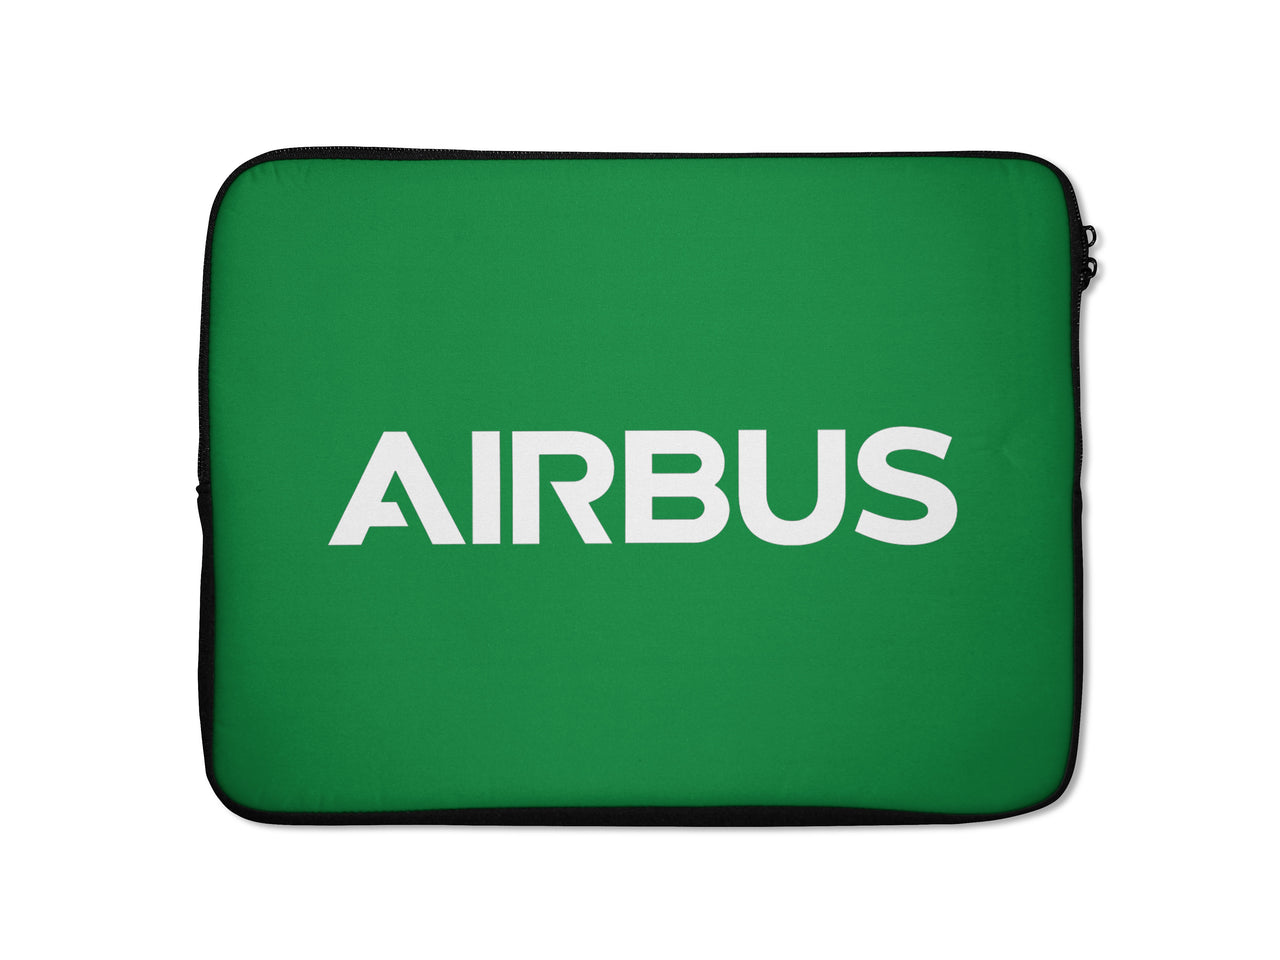 Airbus & Text Designed Laptop & Tablet Cases